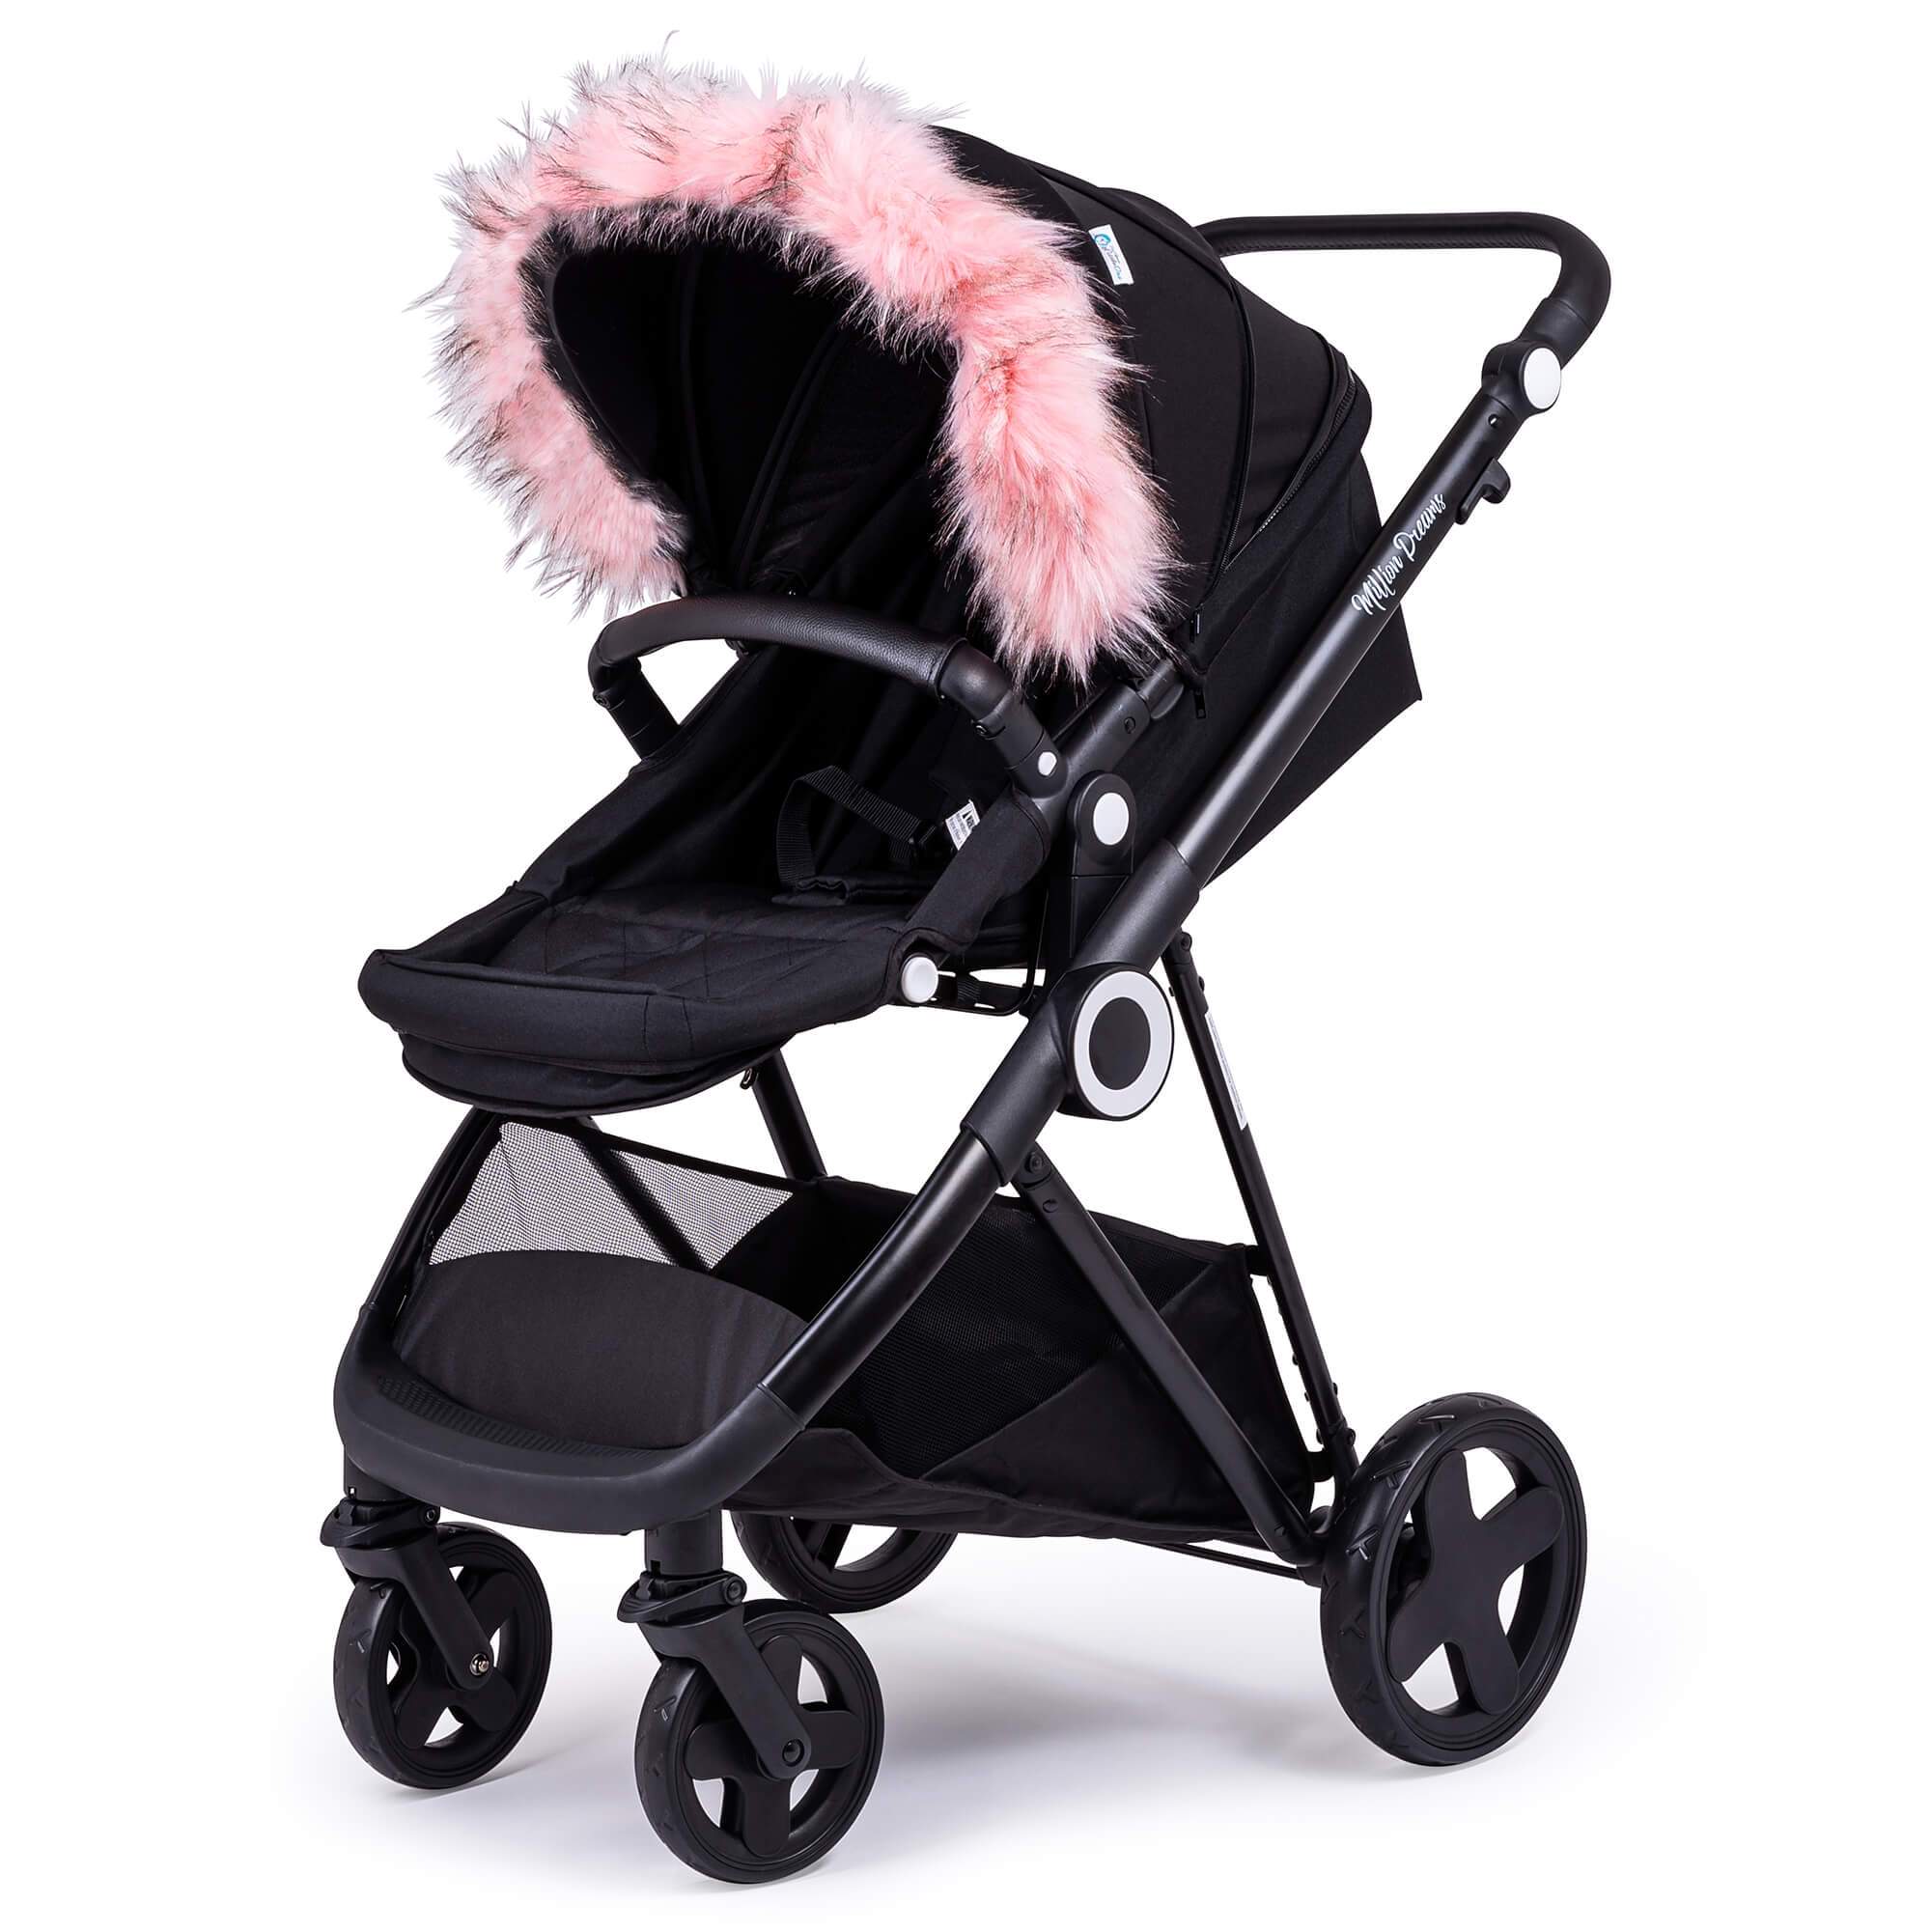 Pram Fur Hood Trim Attachment for Pushchair Compatible with Bebecar - Light Pink / Fits All Models | For Your Little One